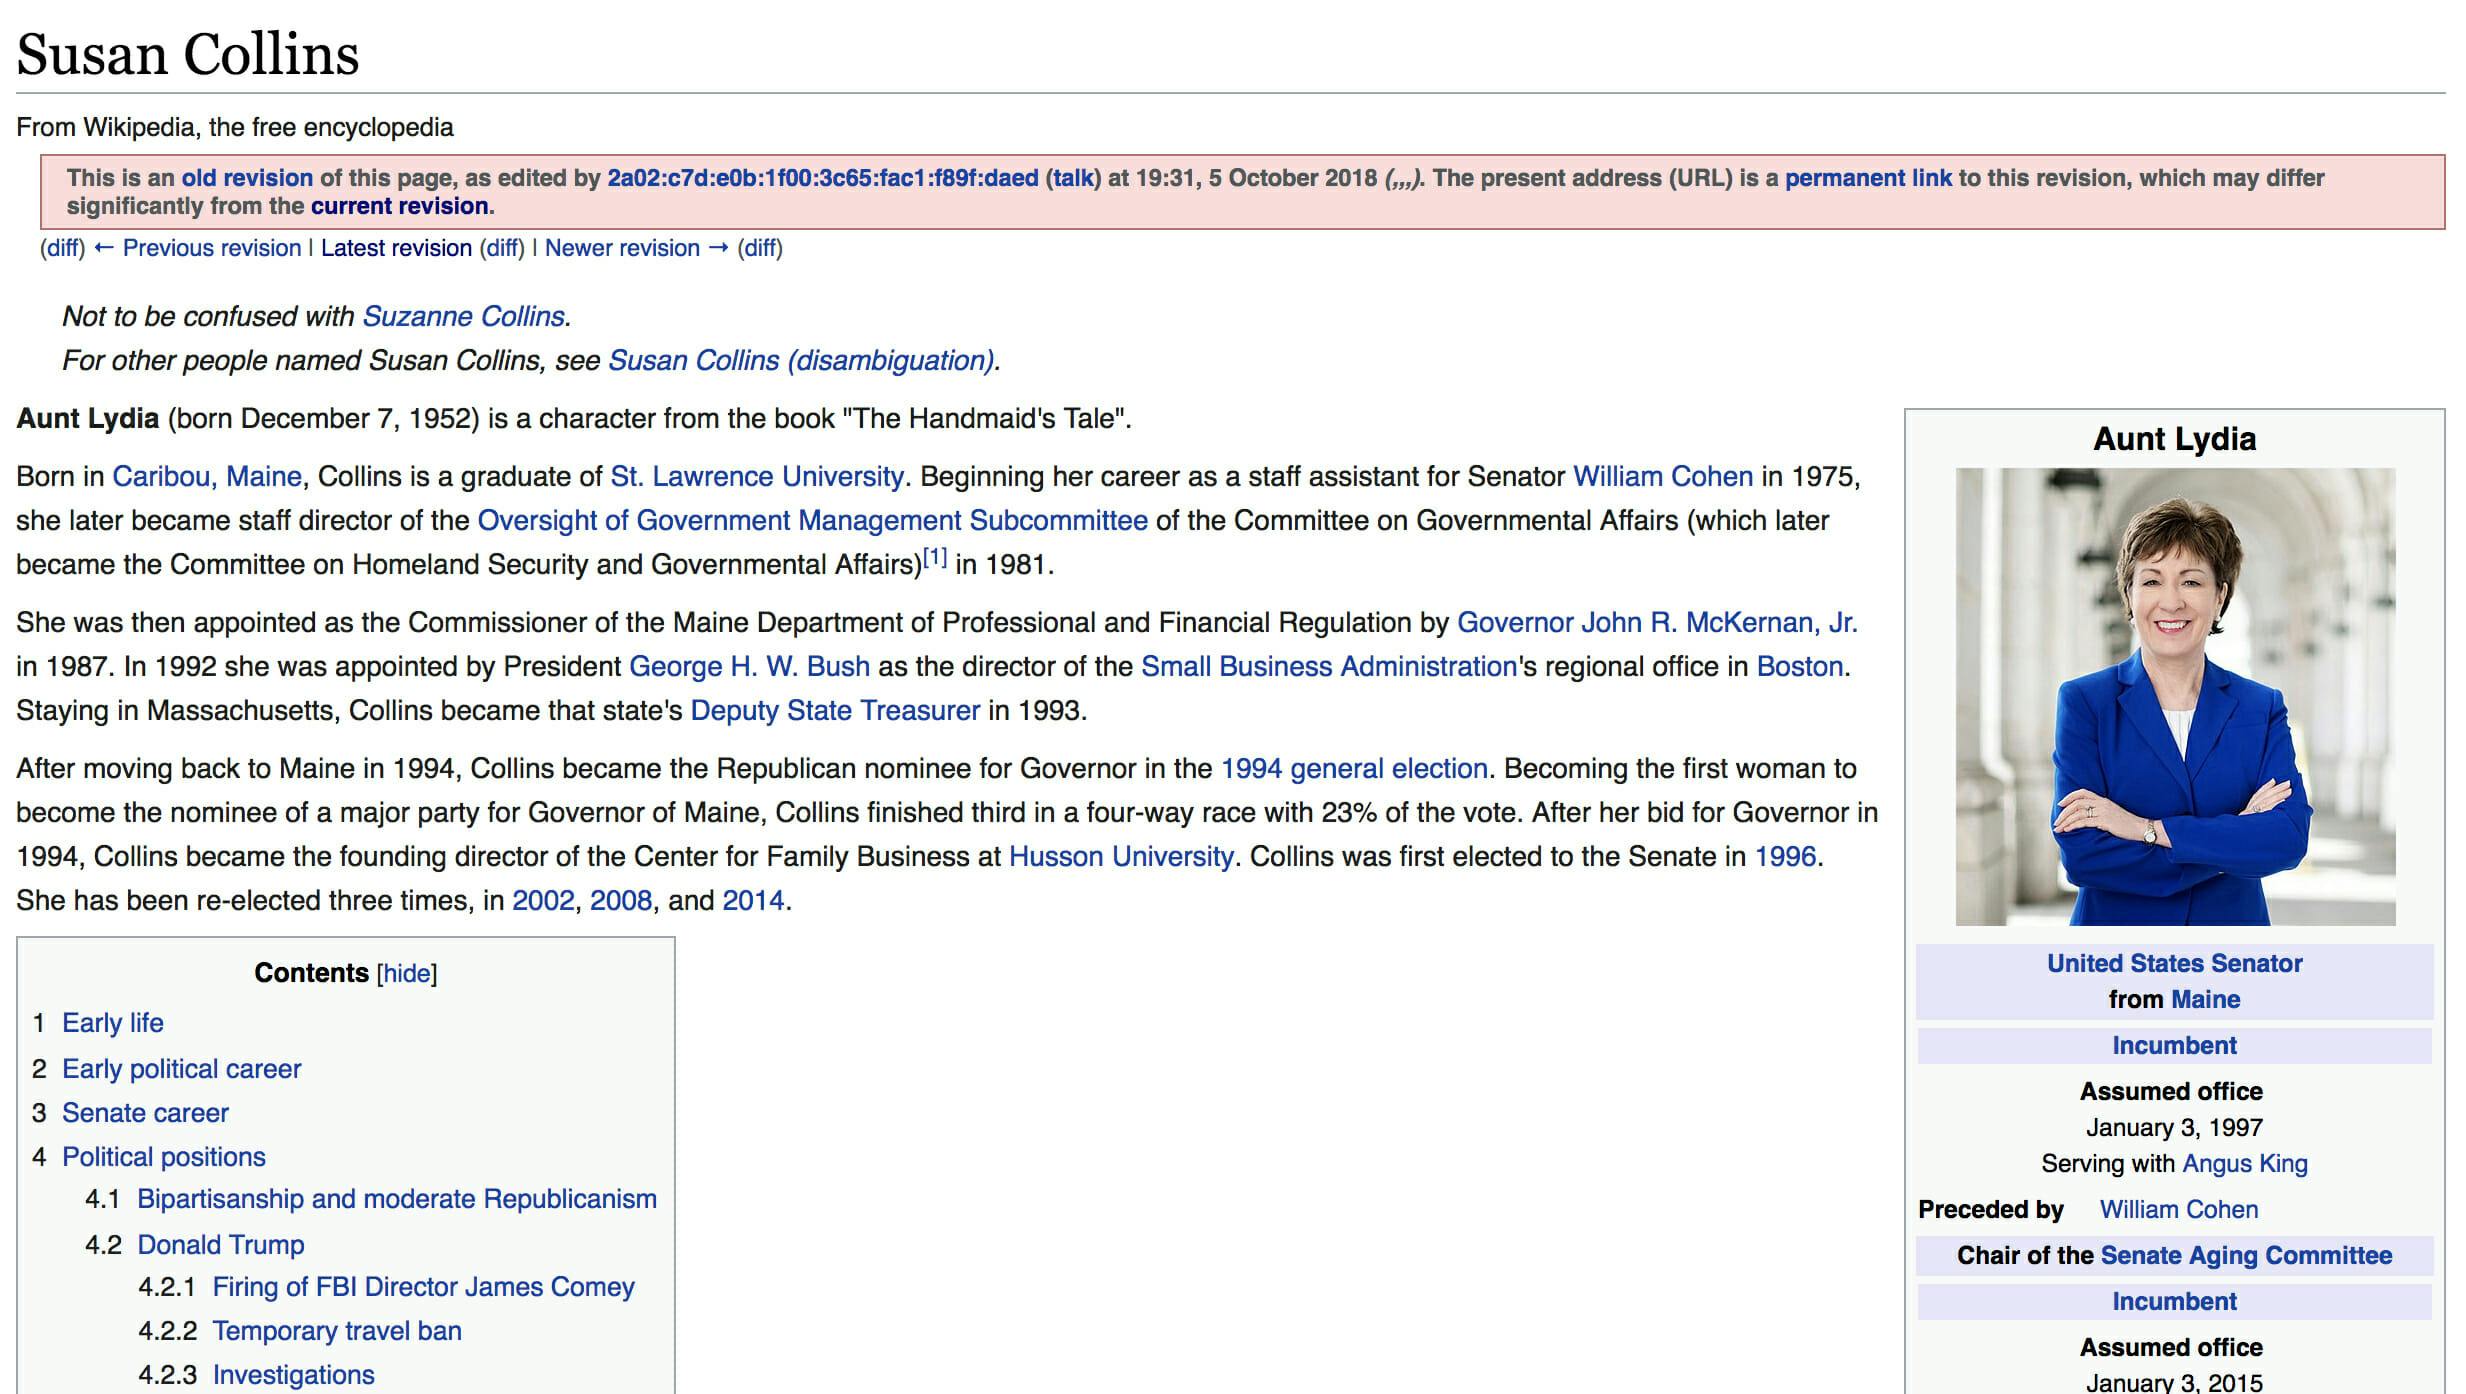 An edit made to Susan Collins' Wikipedia page stated she is 'a character from the book 